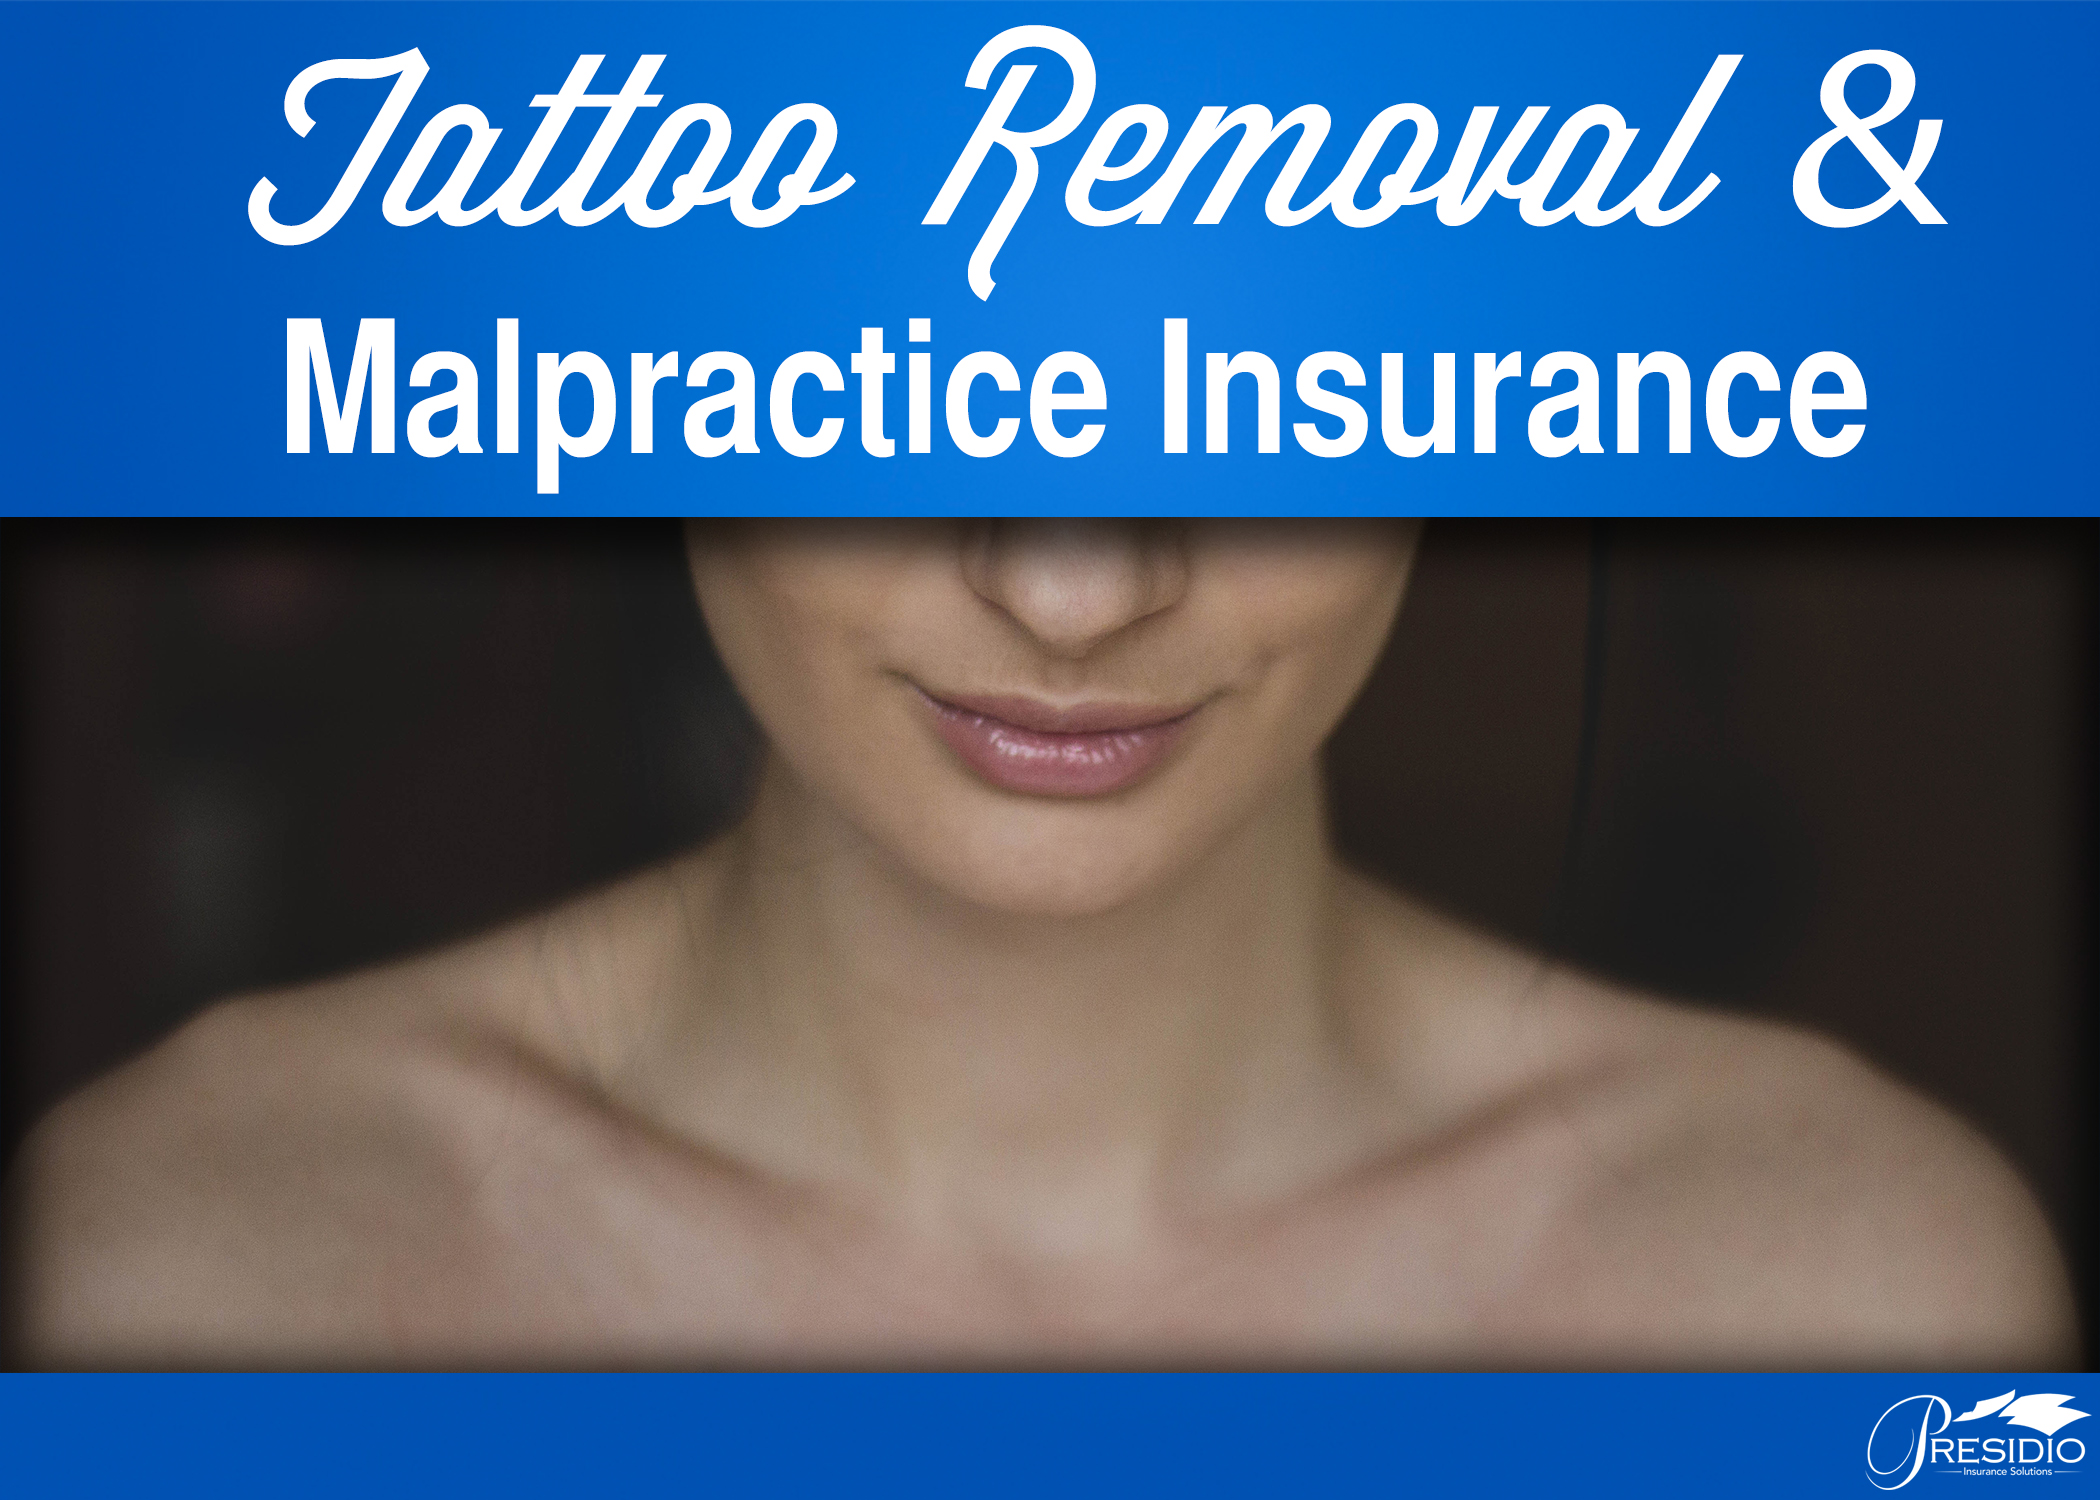 Do Tattoo Removal Businesses Need Malpractice Insurance ?